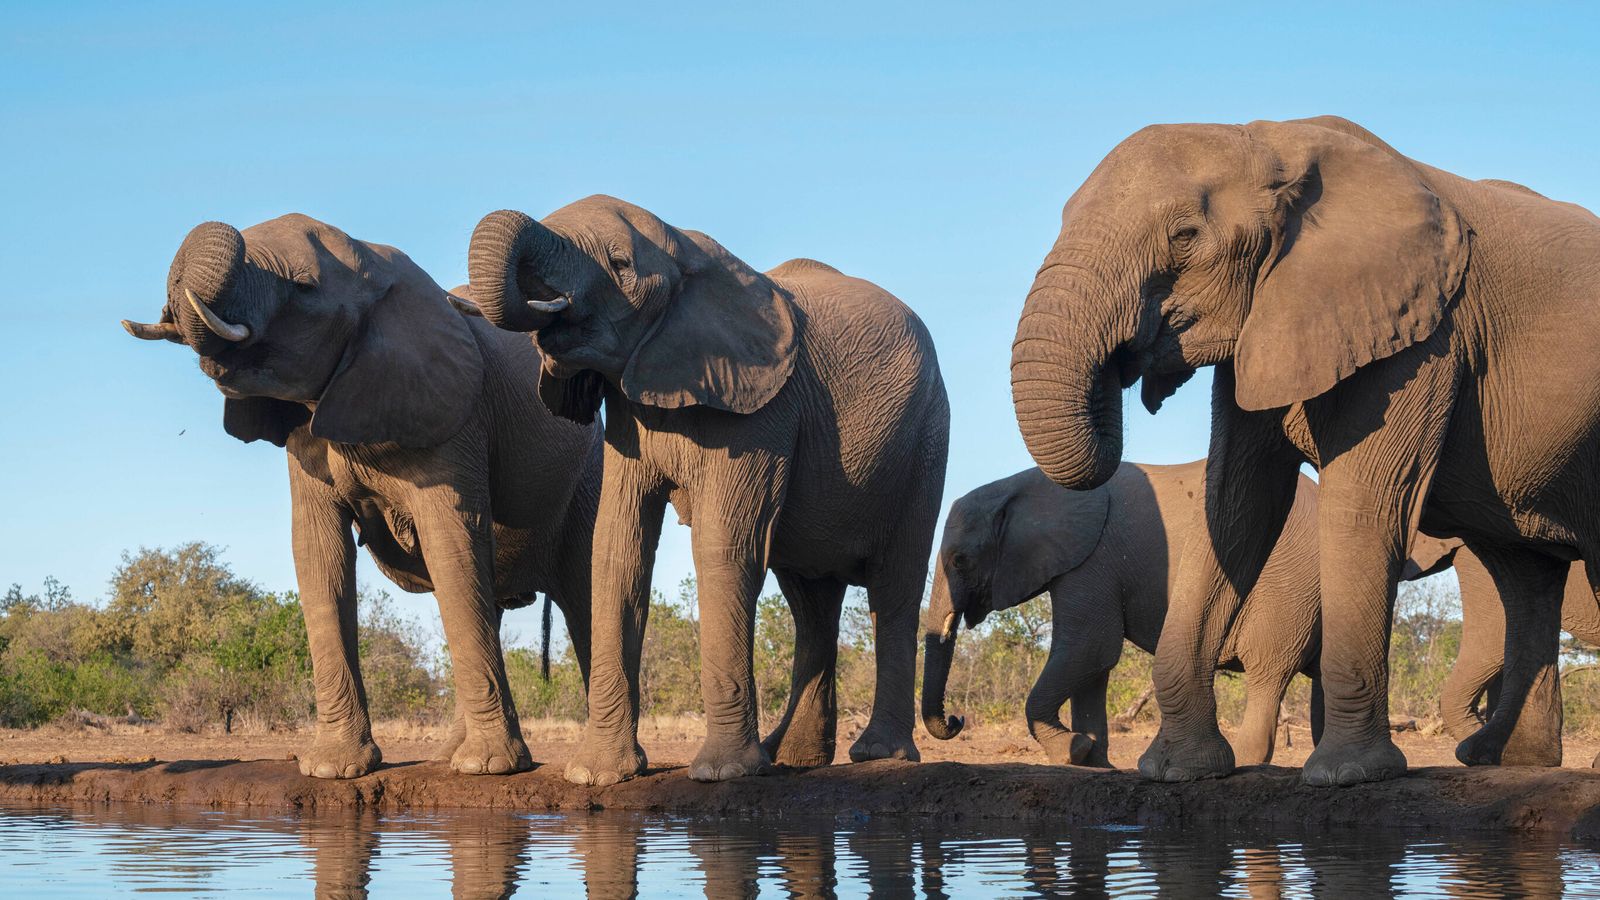 The Elephants of Botswana: A Delicate Balance Between Conservation and Coexistence